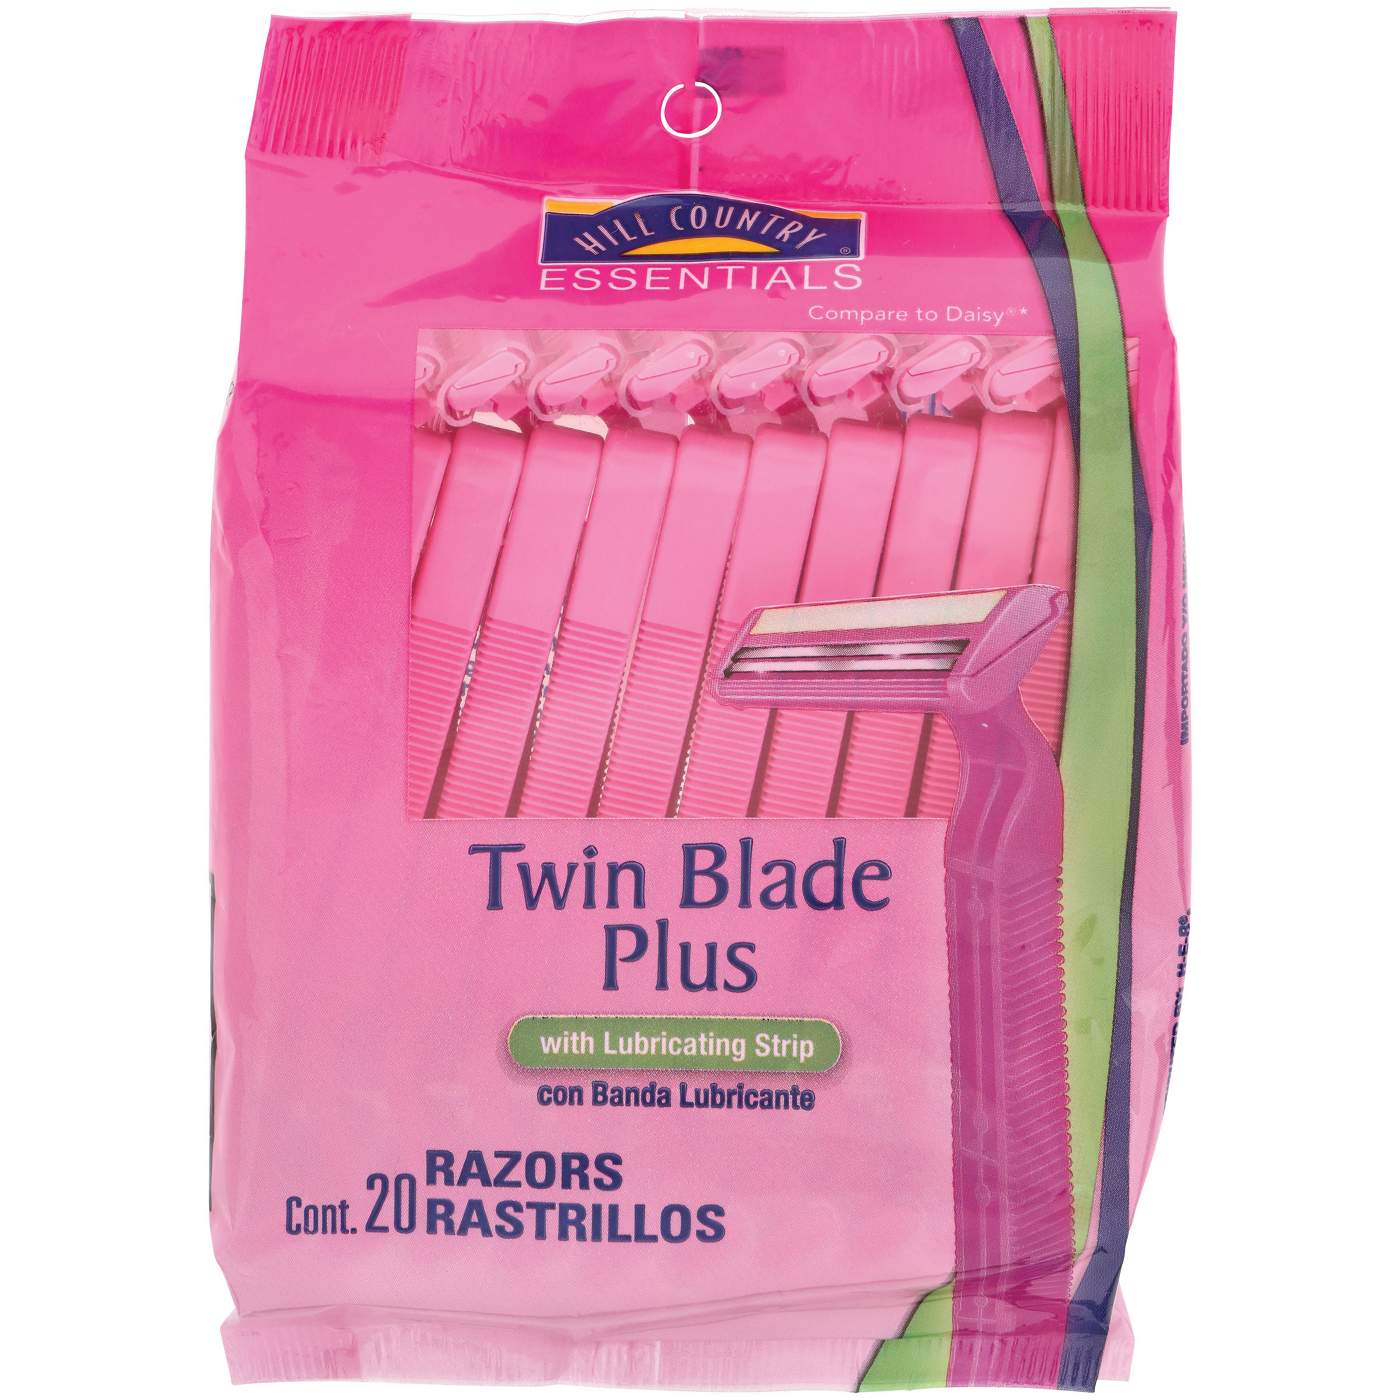 Hill Country Essentials Twin Blade Plus Disposable Razors - Pink; image 1 of 4